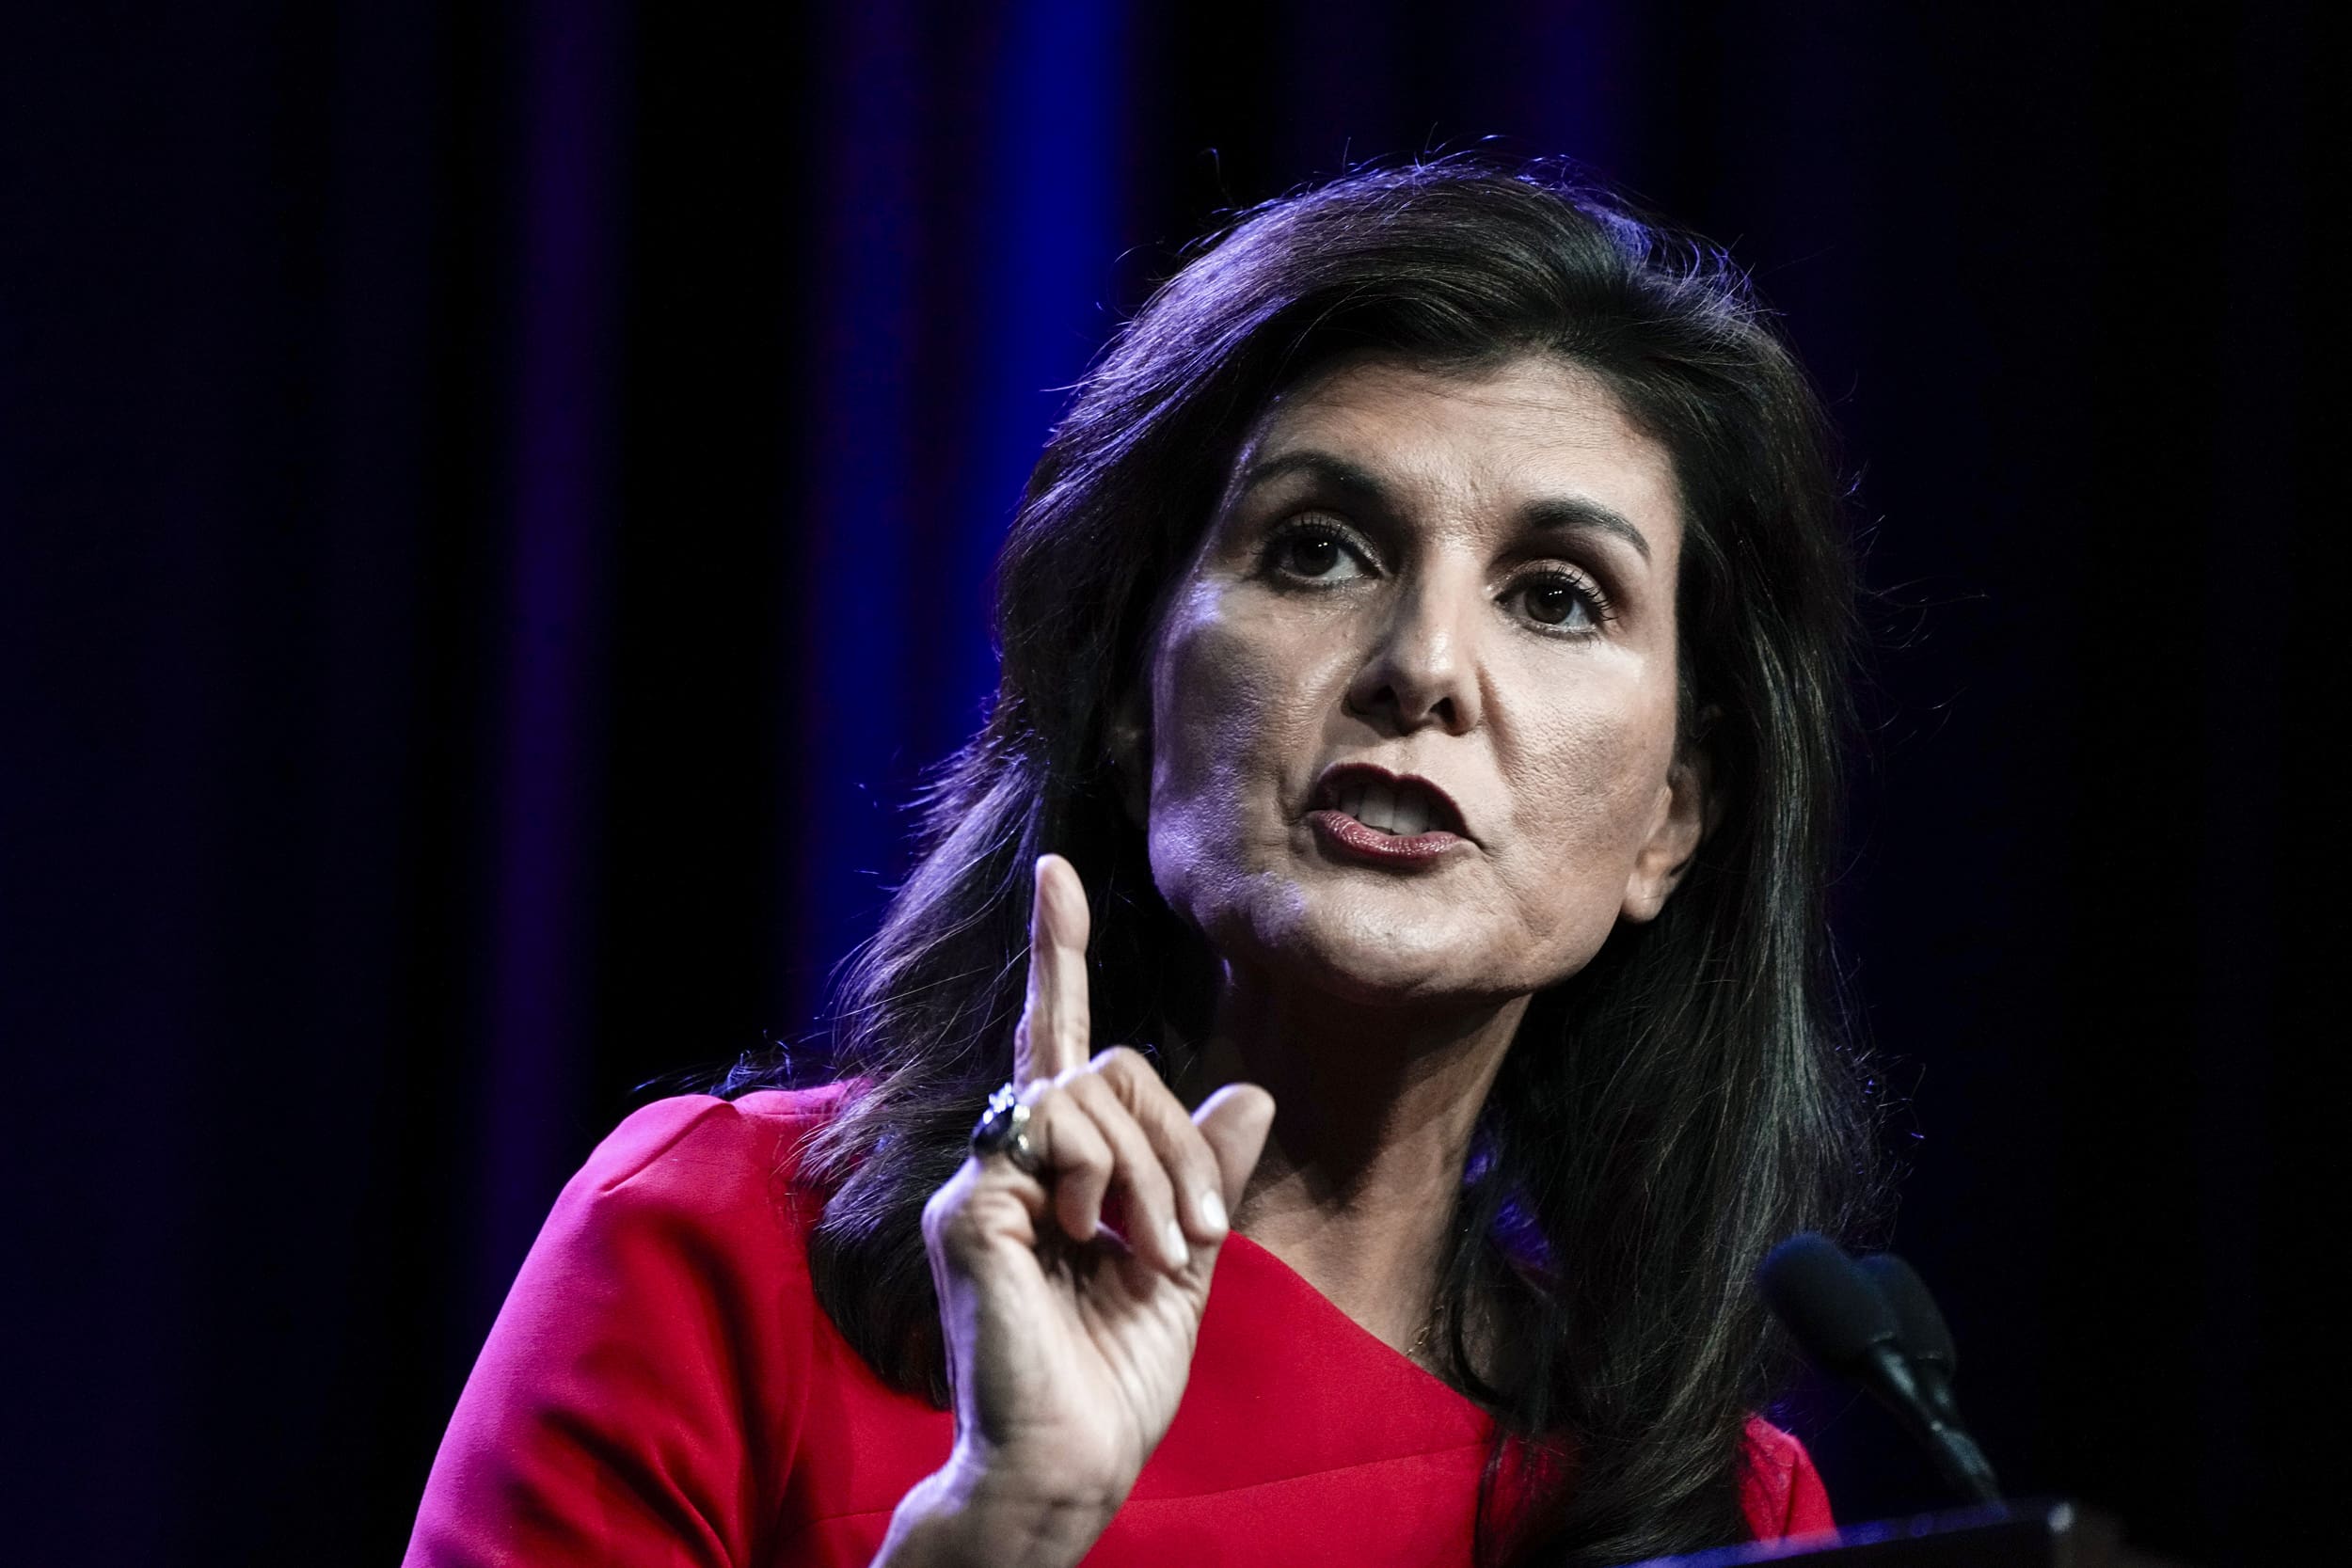 Nikki Haley Reveals Campaign Economic Plan, In Contrast With her Actual Record in South Carolina | The Gateway Pundit